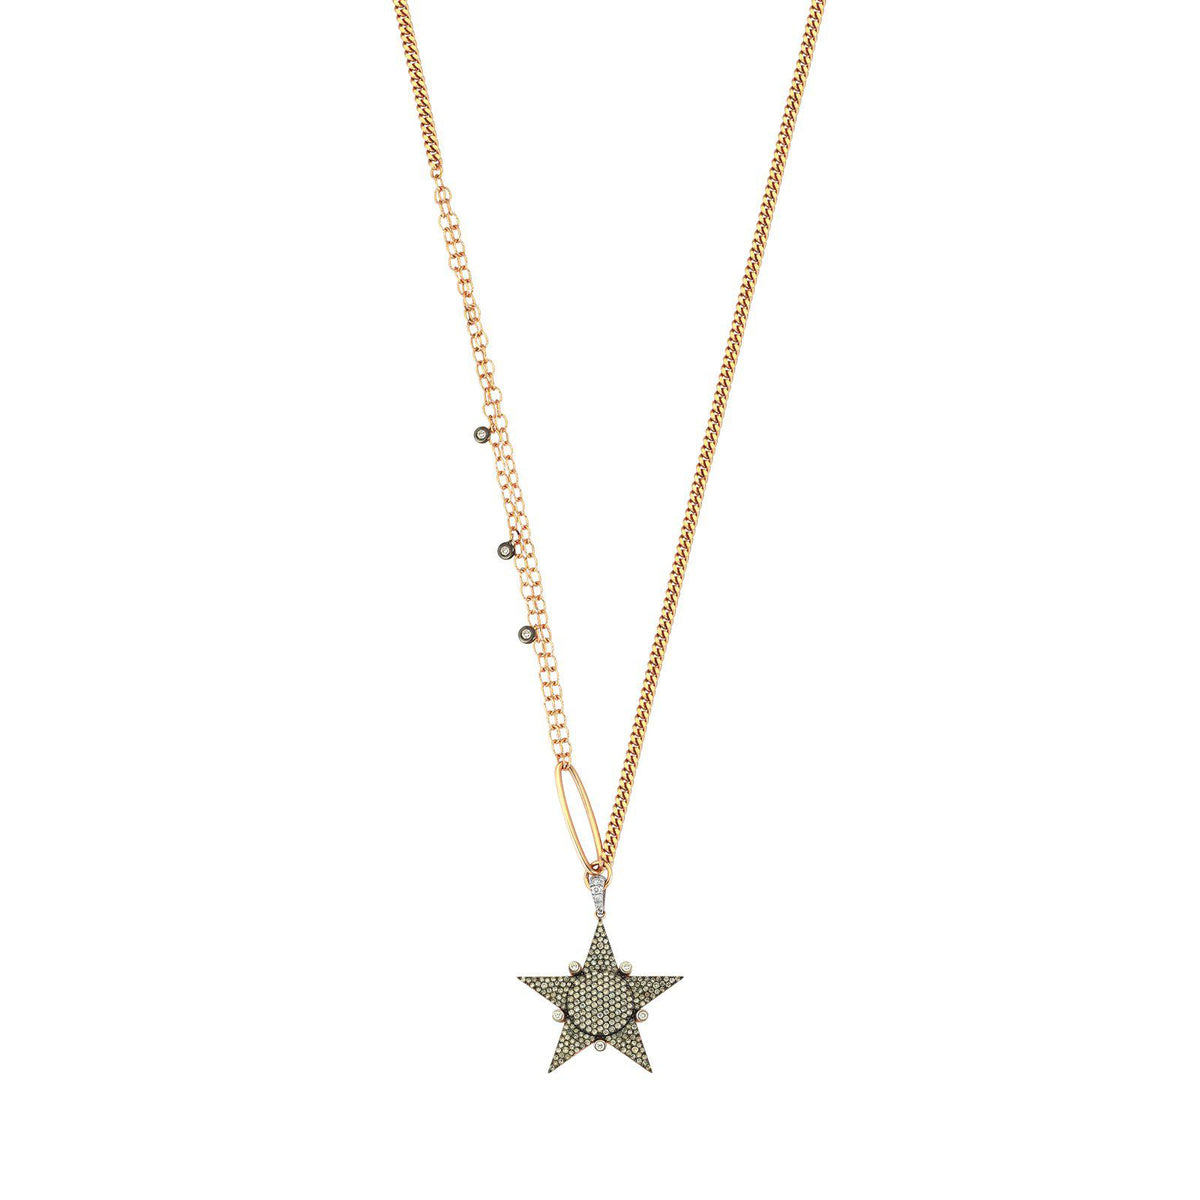 Midi Eclectic Star Necklace